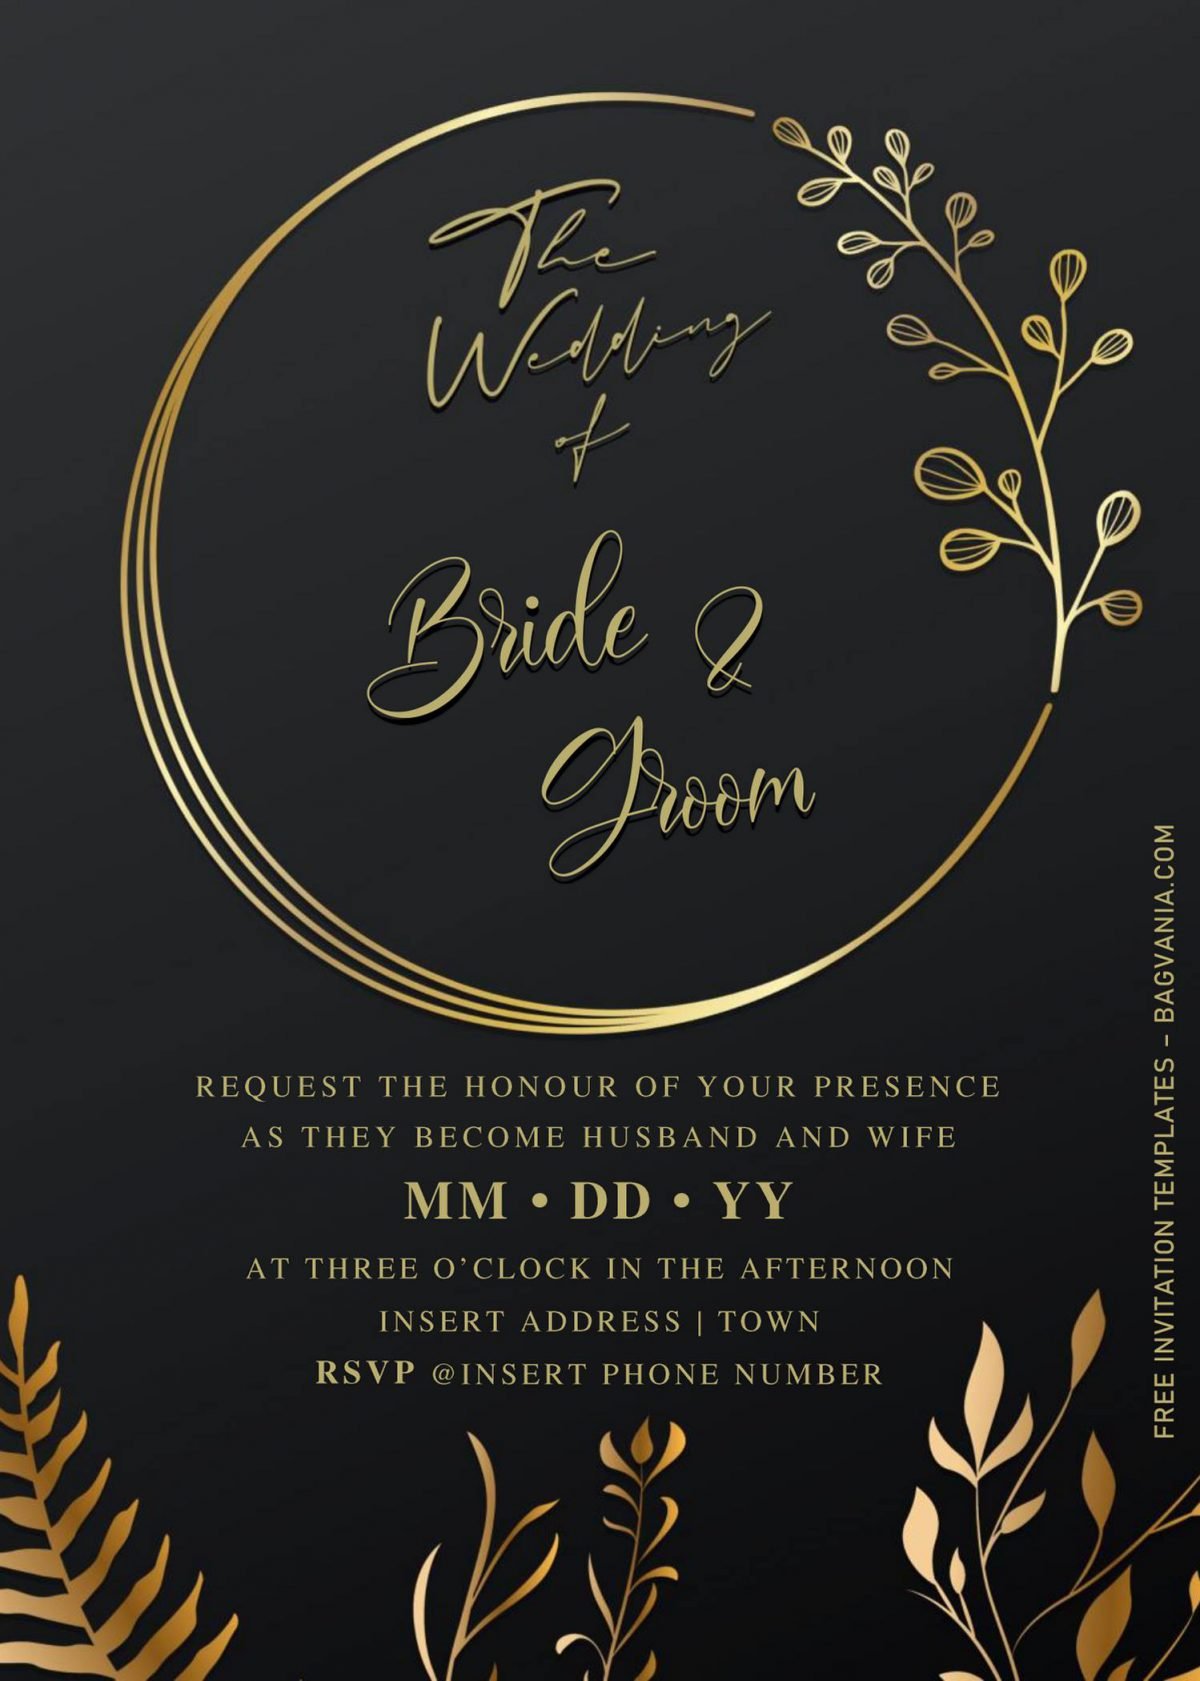 Free Elegant Black And Gold Wedding Invitation Templates For Word and has gold leaves